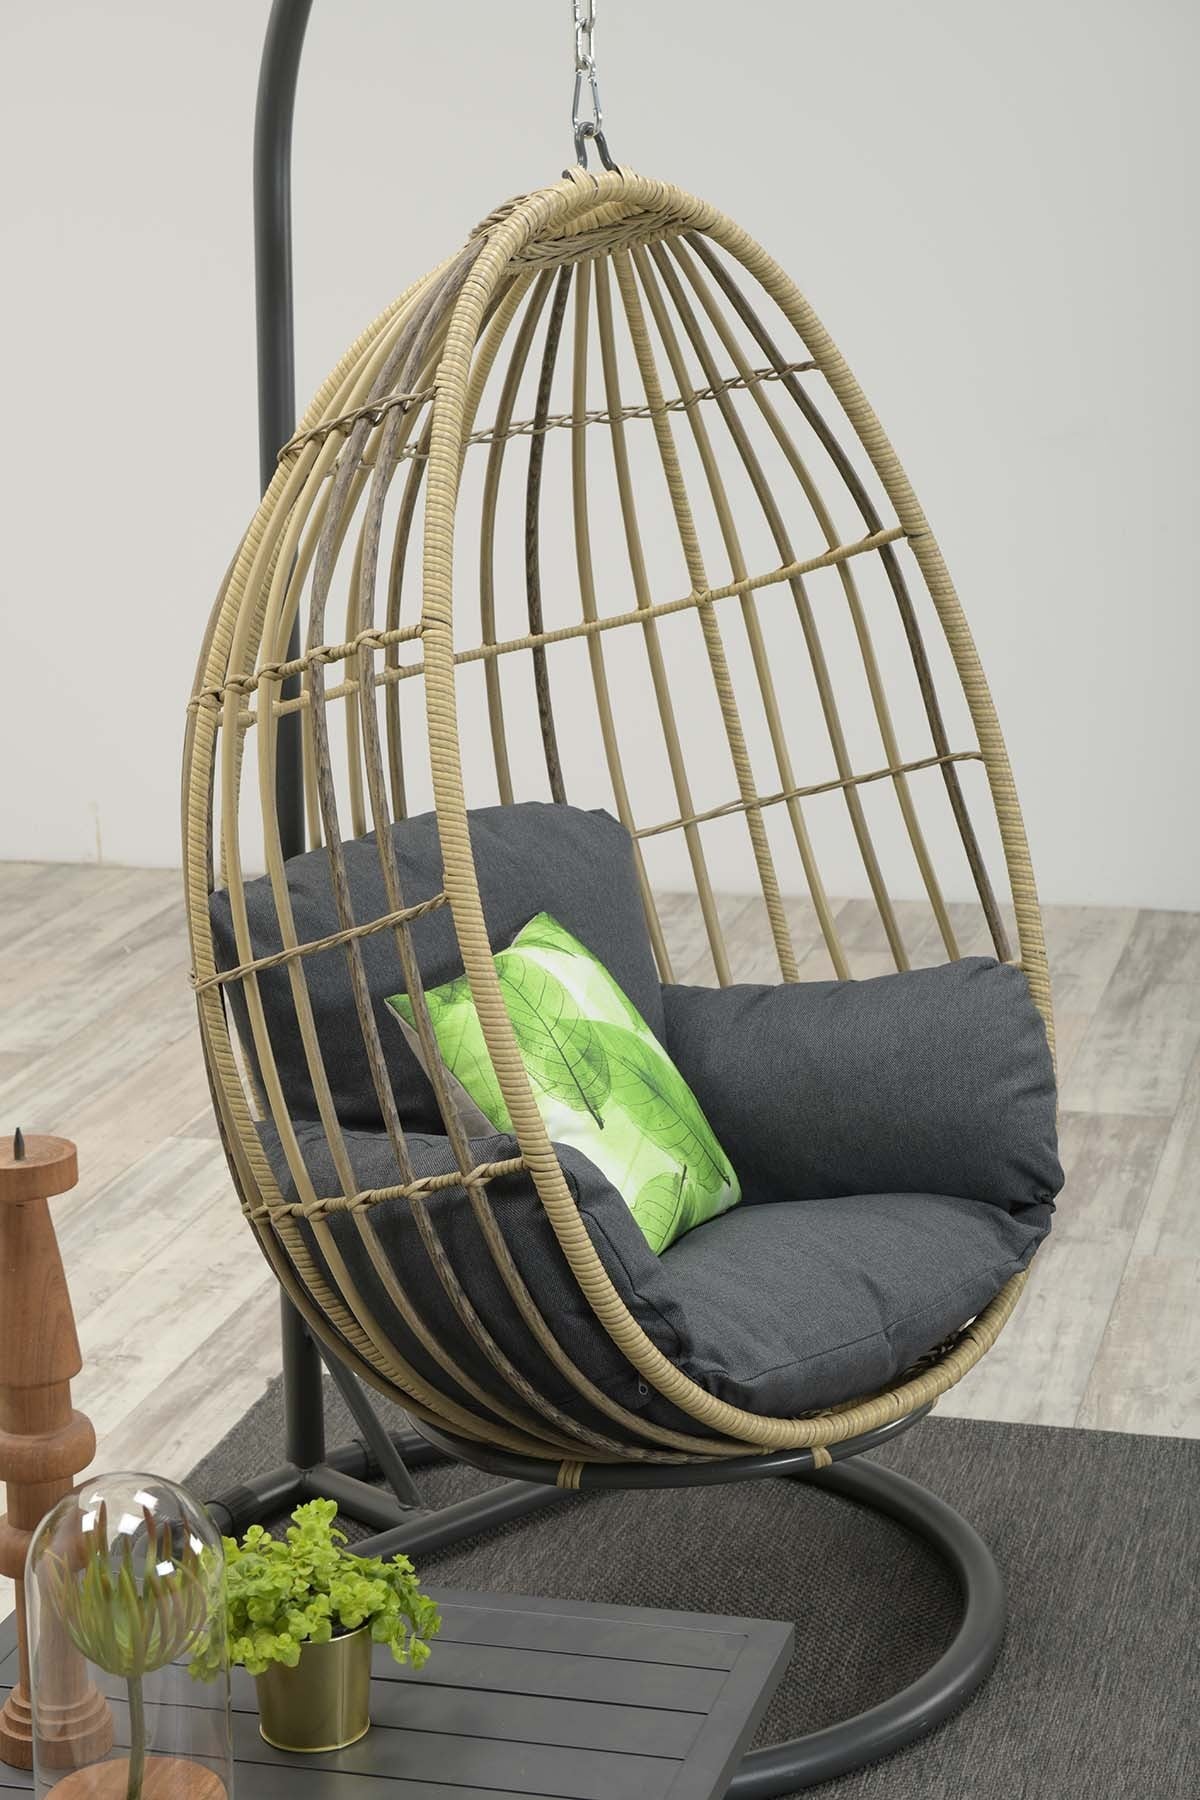 Garden Impressions - Panama Swing Chair Egg - 3 Colour Options - Beyond outdoor living